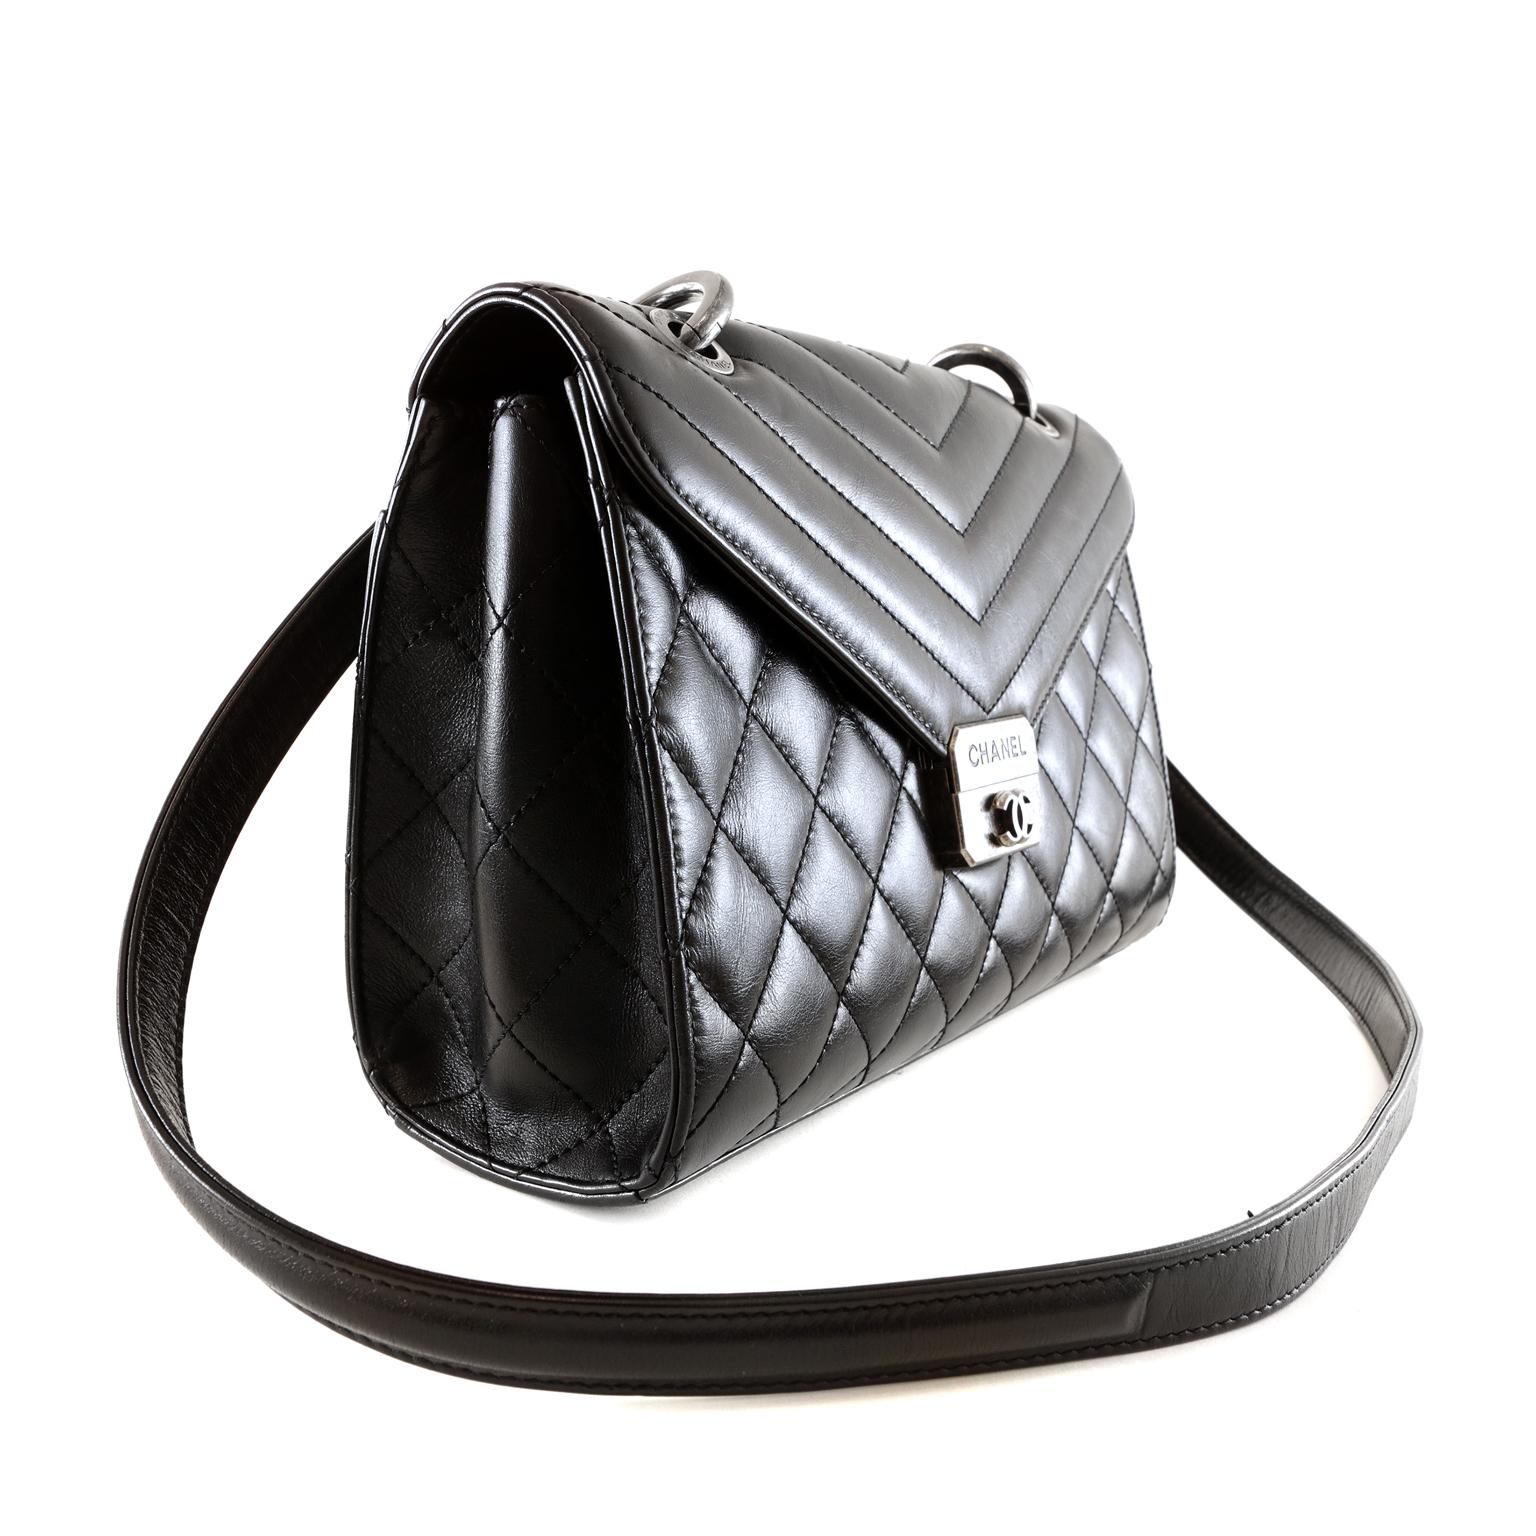 Chanel Black Lambskin Chevron Crossbody - PRISTINE UNWORN CONDITION
  Uniquely styled with a leather crossbody strap and a shorter edgy chain strap, this piece is versatile and sporty.
Black lambskin is quilted in signature Chanel diamond pattern